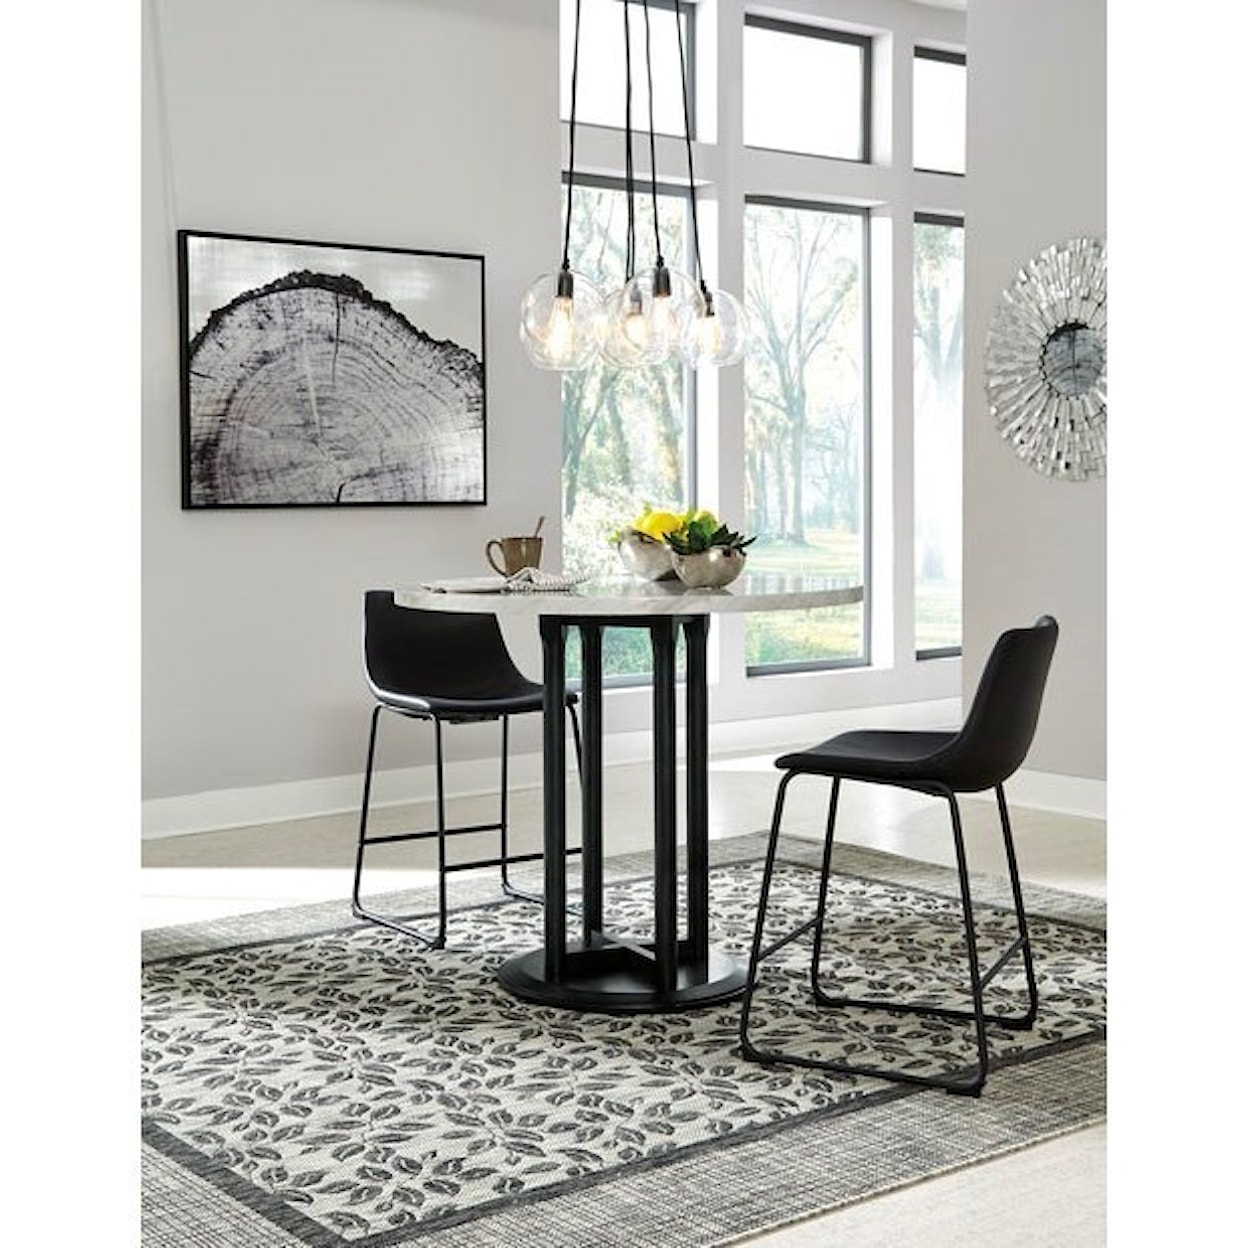 Signature Design by Ashley Furniture Centiar Round Dining Room Counter Table